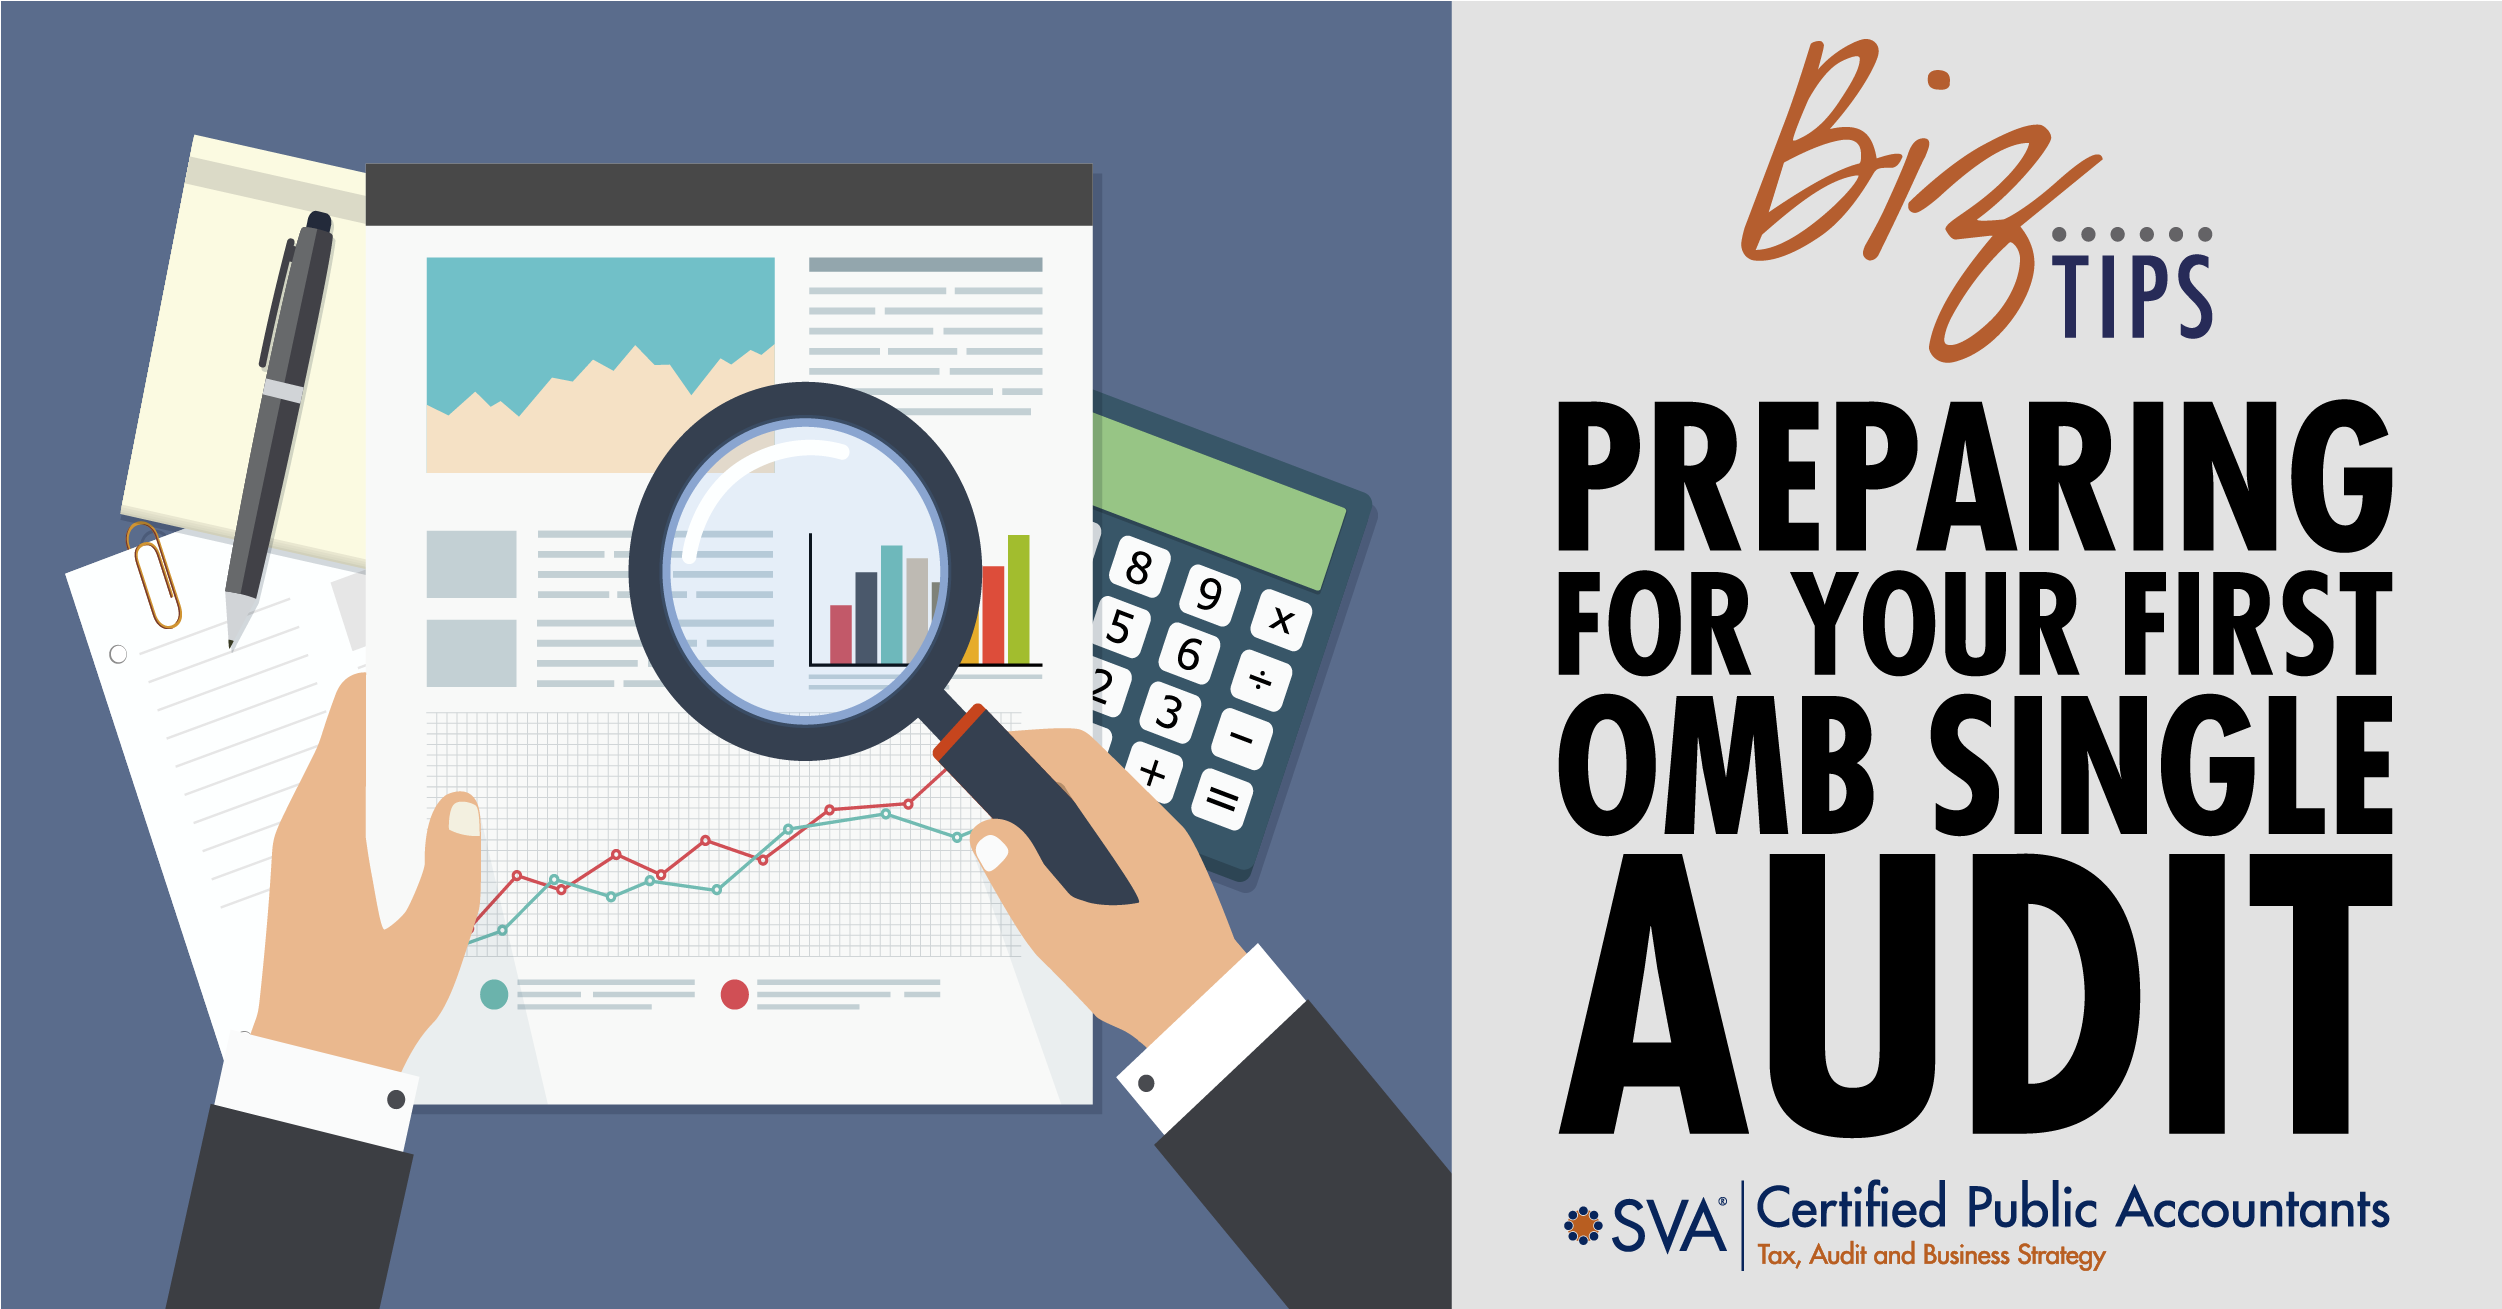 Preparing For Your First OMB Single Audit